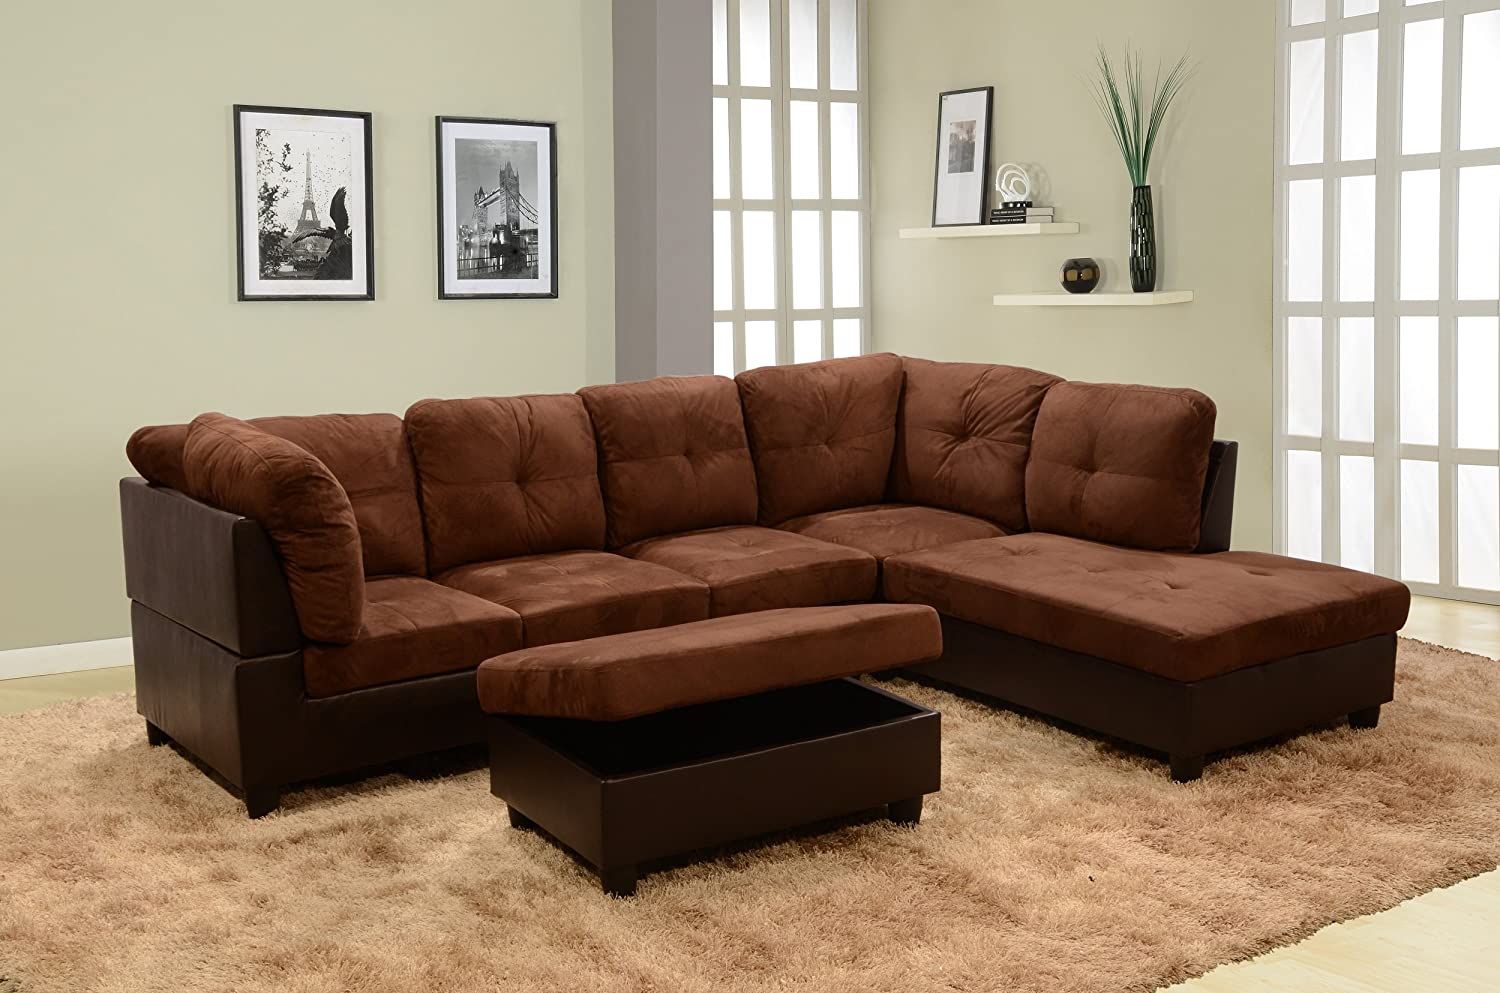 Ainehome 3 Pcs Living Room Set, Sectional Sofa Set Intended For Monet Right Facing Sectional Sofas (View 2 of 15)